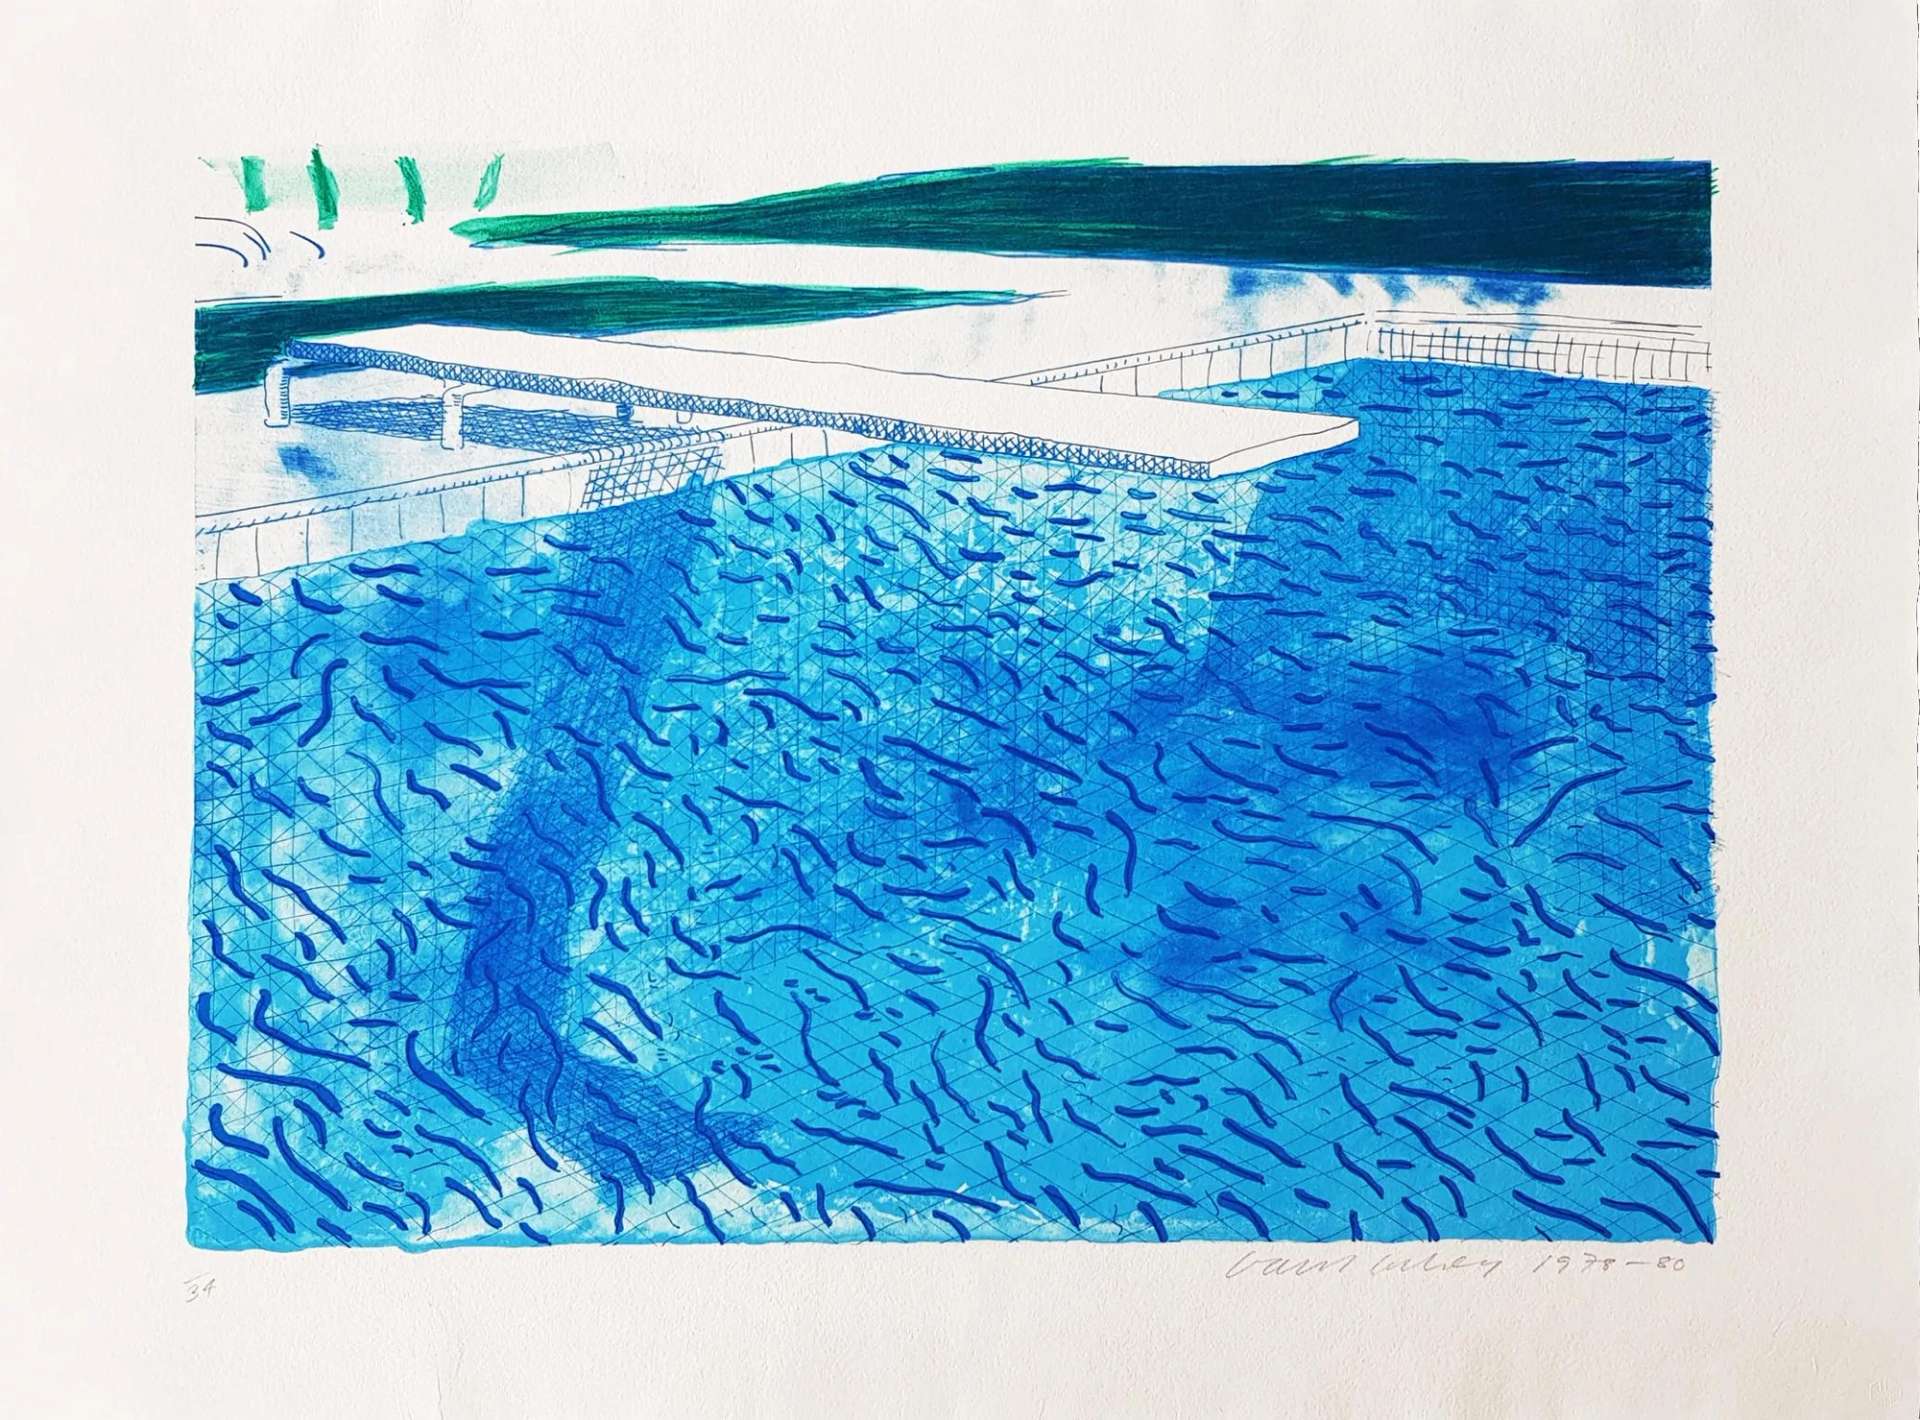 A lithograph by David Hockney depicting a blue swimming pool with a diving board.